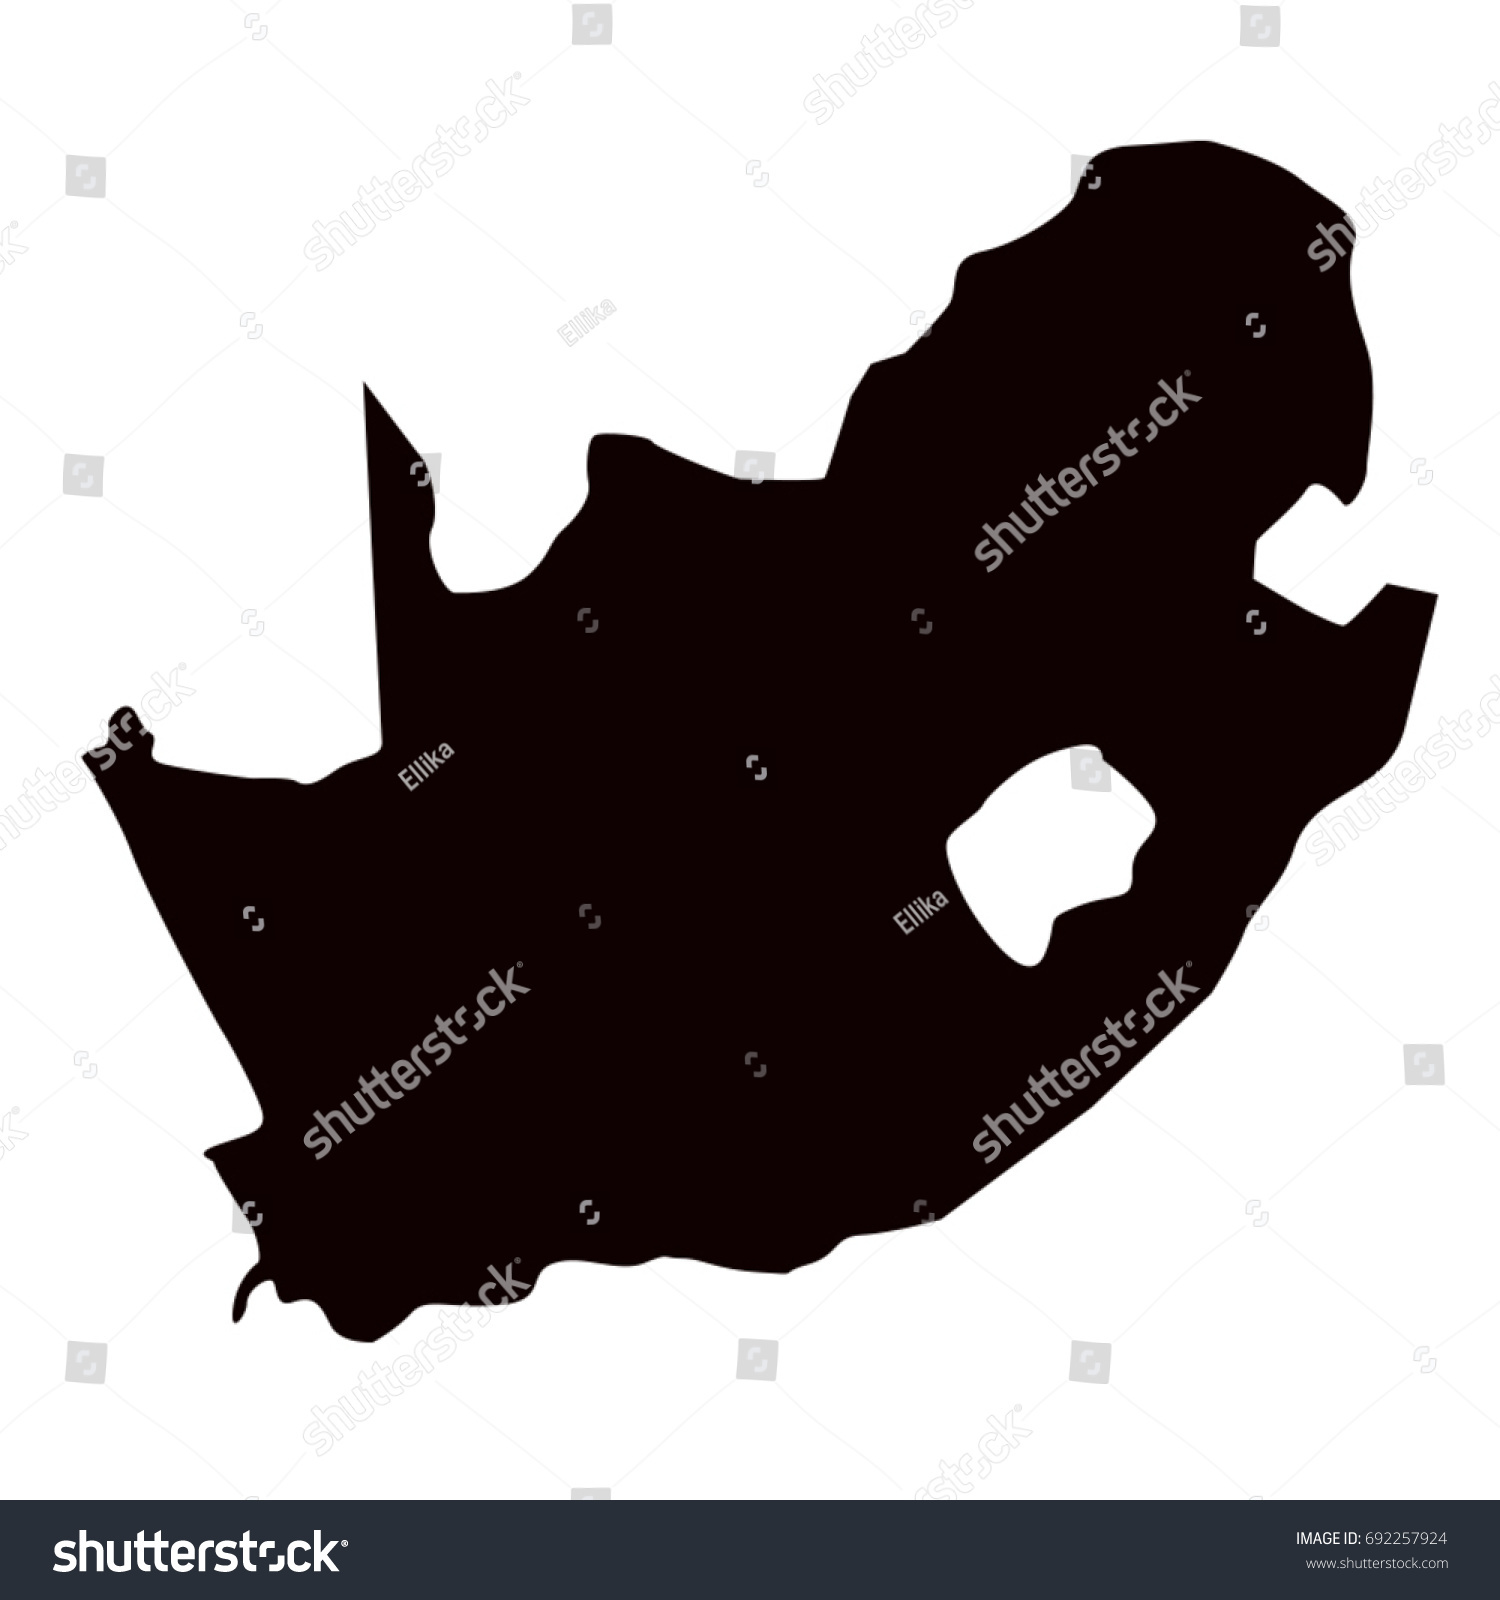 South Africa Map Stock Vector Royalty Free 692257924 0918